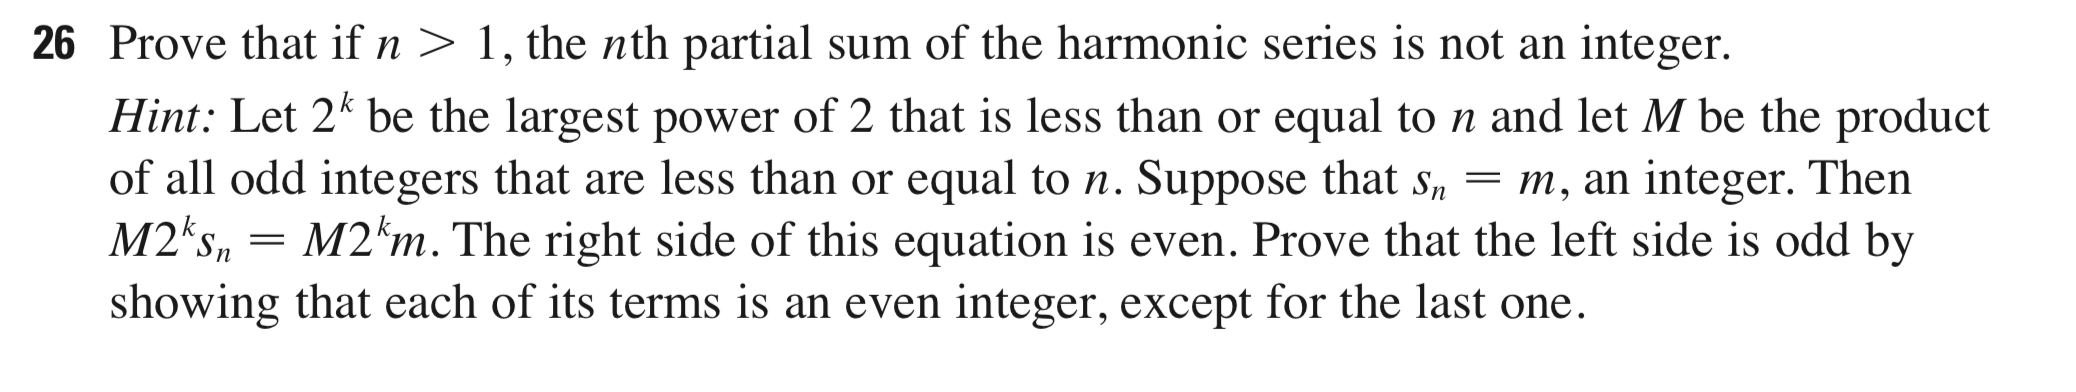 Prove that if n > 1, the nth partial sum of the harmonic series is not an integer.
Hint: Let 2* be the largest power of 2 that is less than or equal to n and let M be the product
of all odd integers that are less than or equal to n. Suppose that s, = m, an integer. Then
M2 s, = M2*m. The right side of this equation is even. Prove that the left side is odd by
showing that each of its terms is an even integer, except for the last one.
